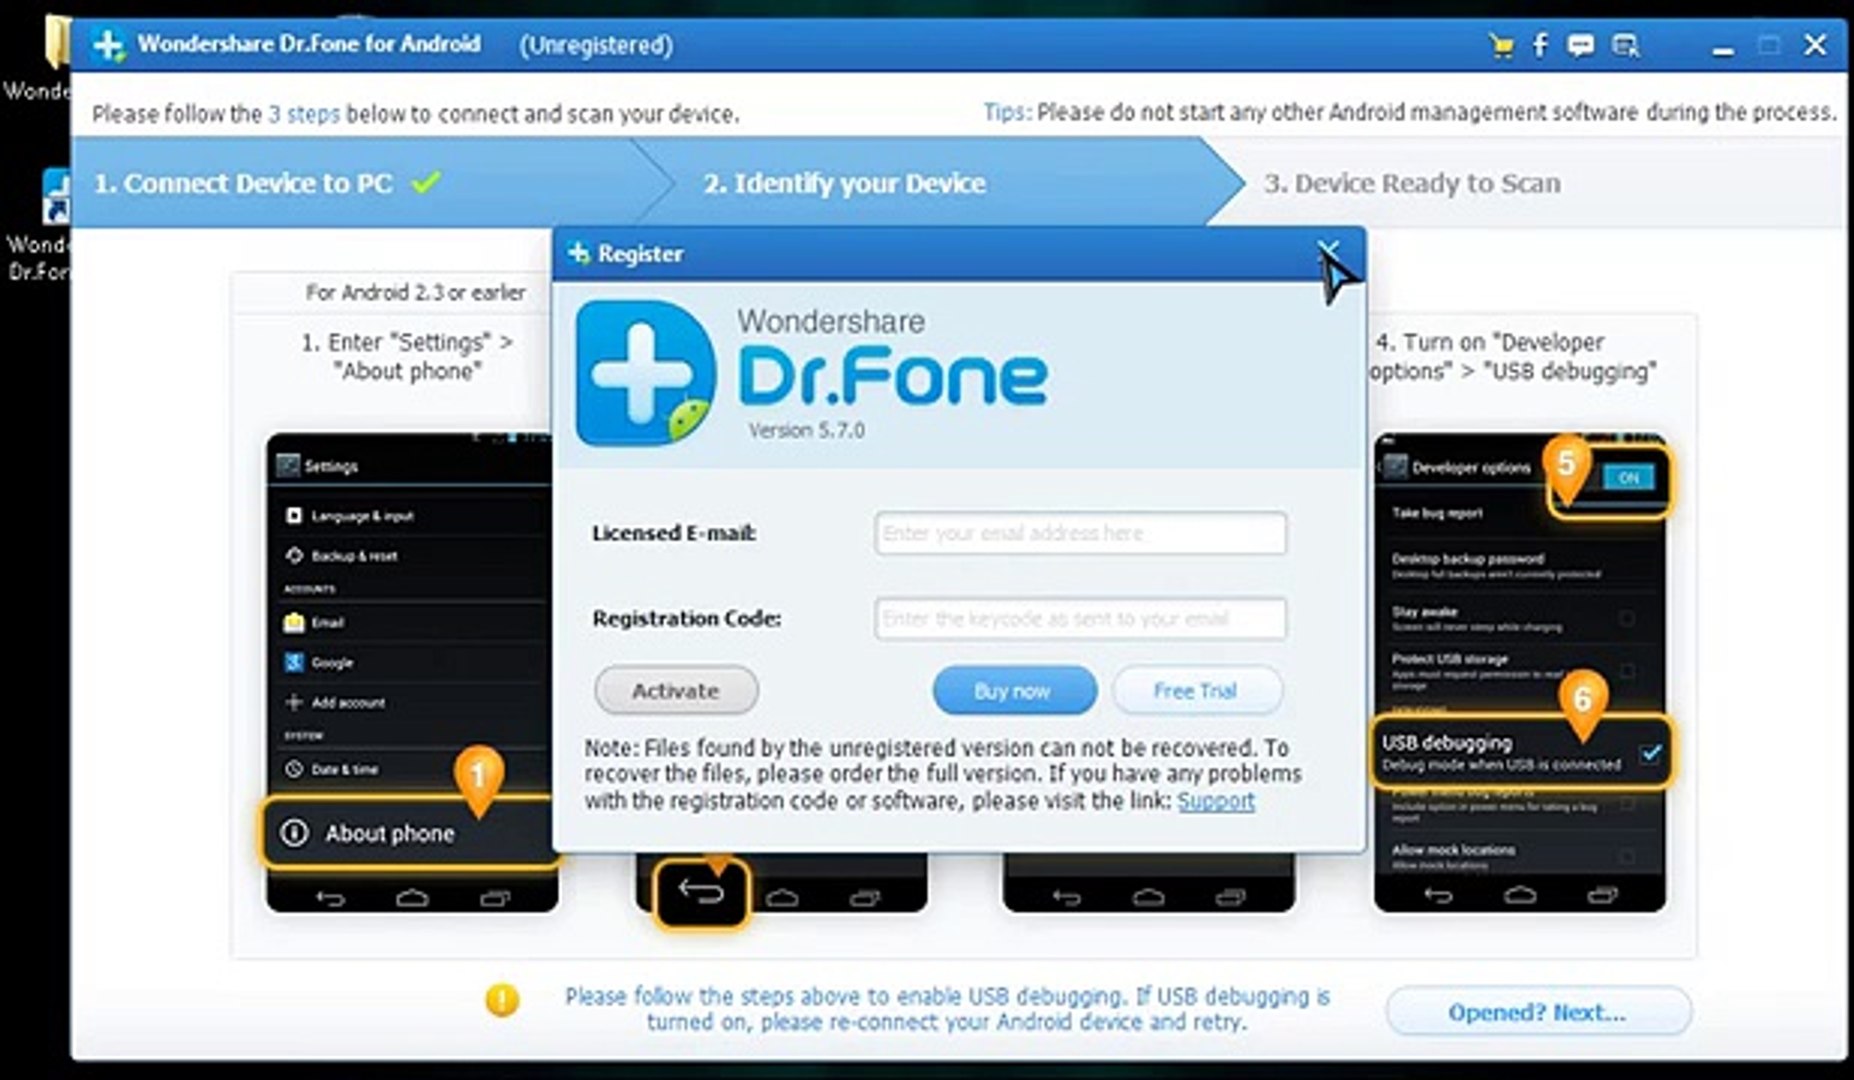 dr fone for windows